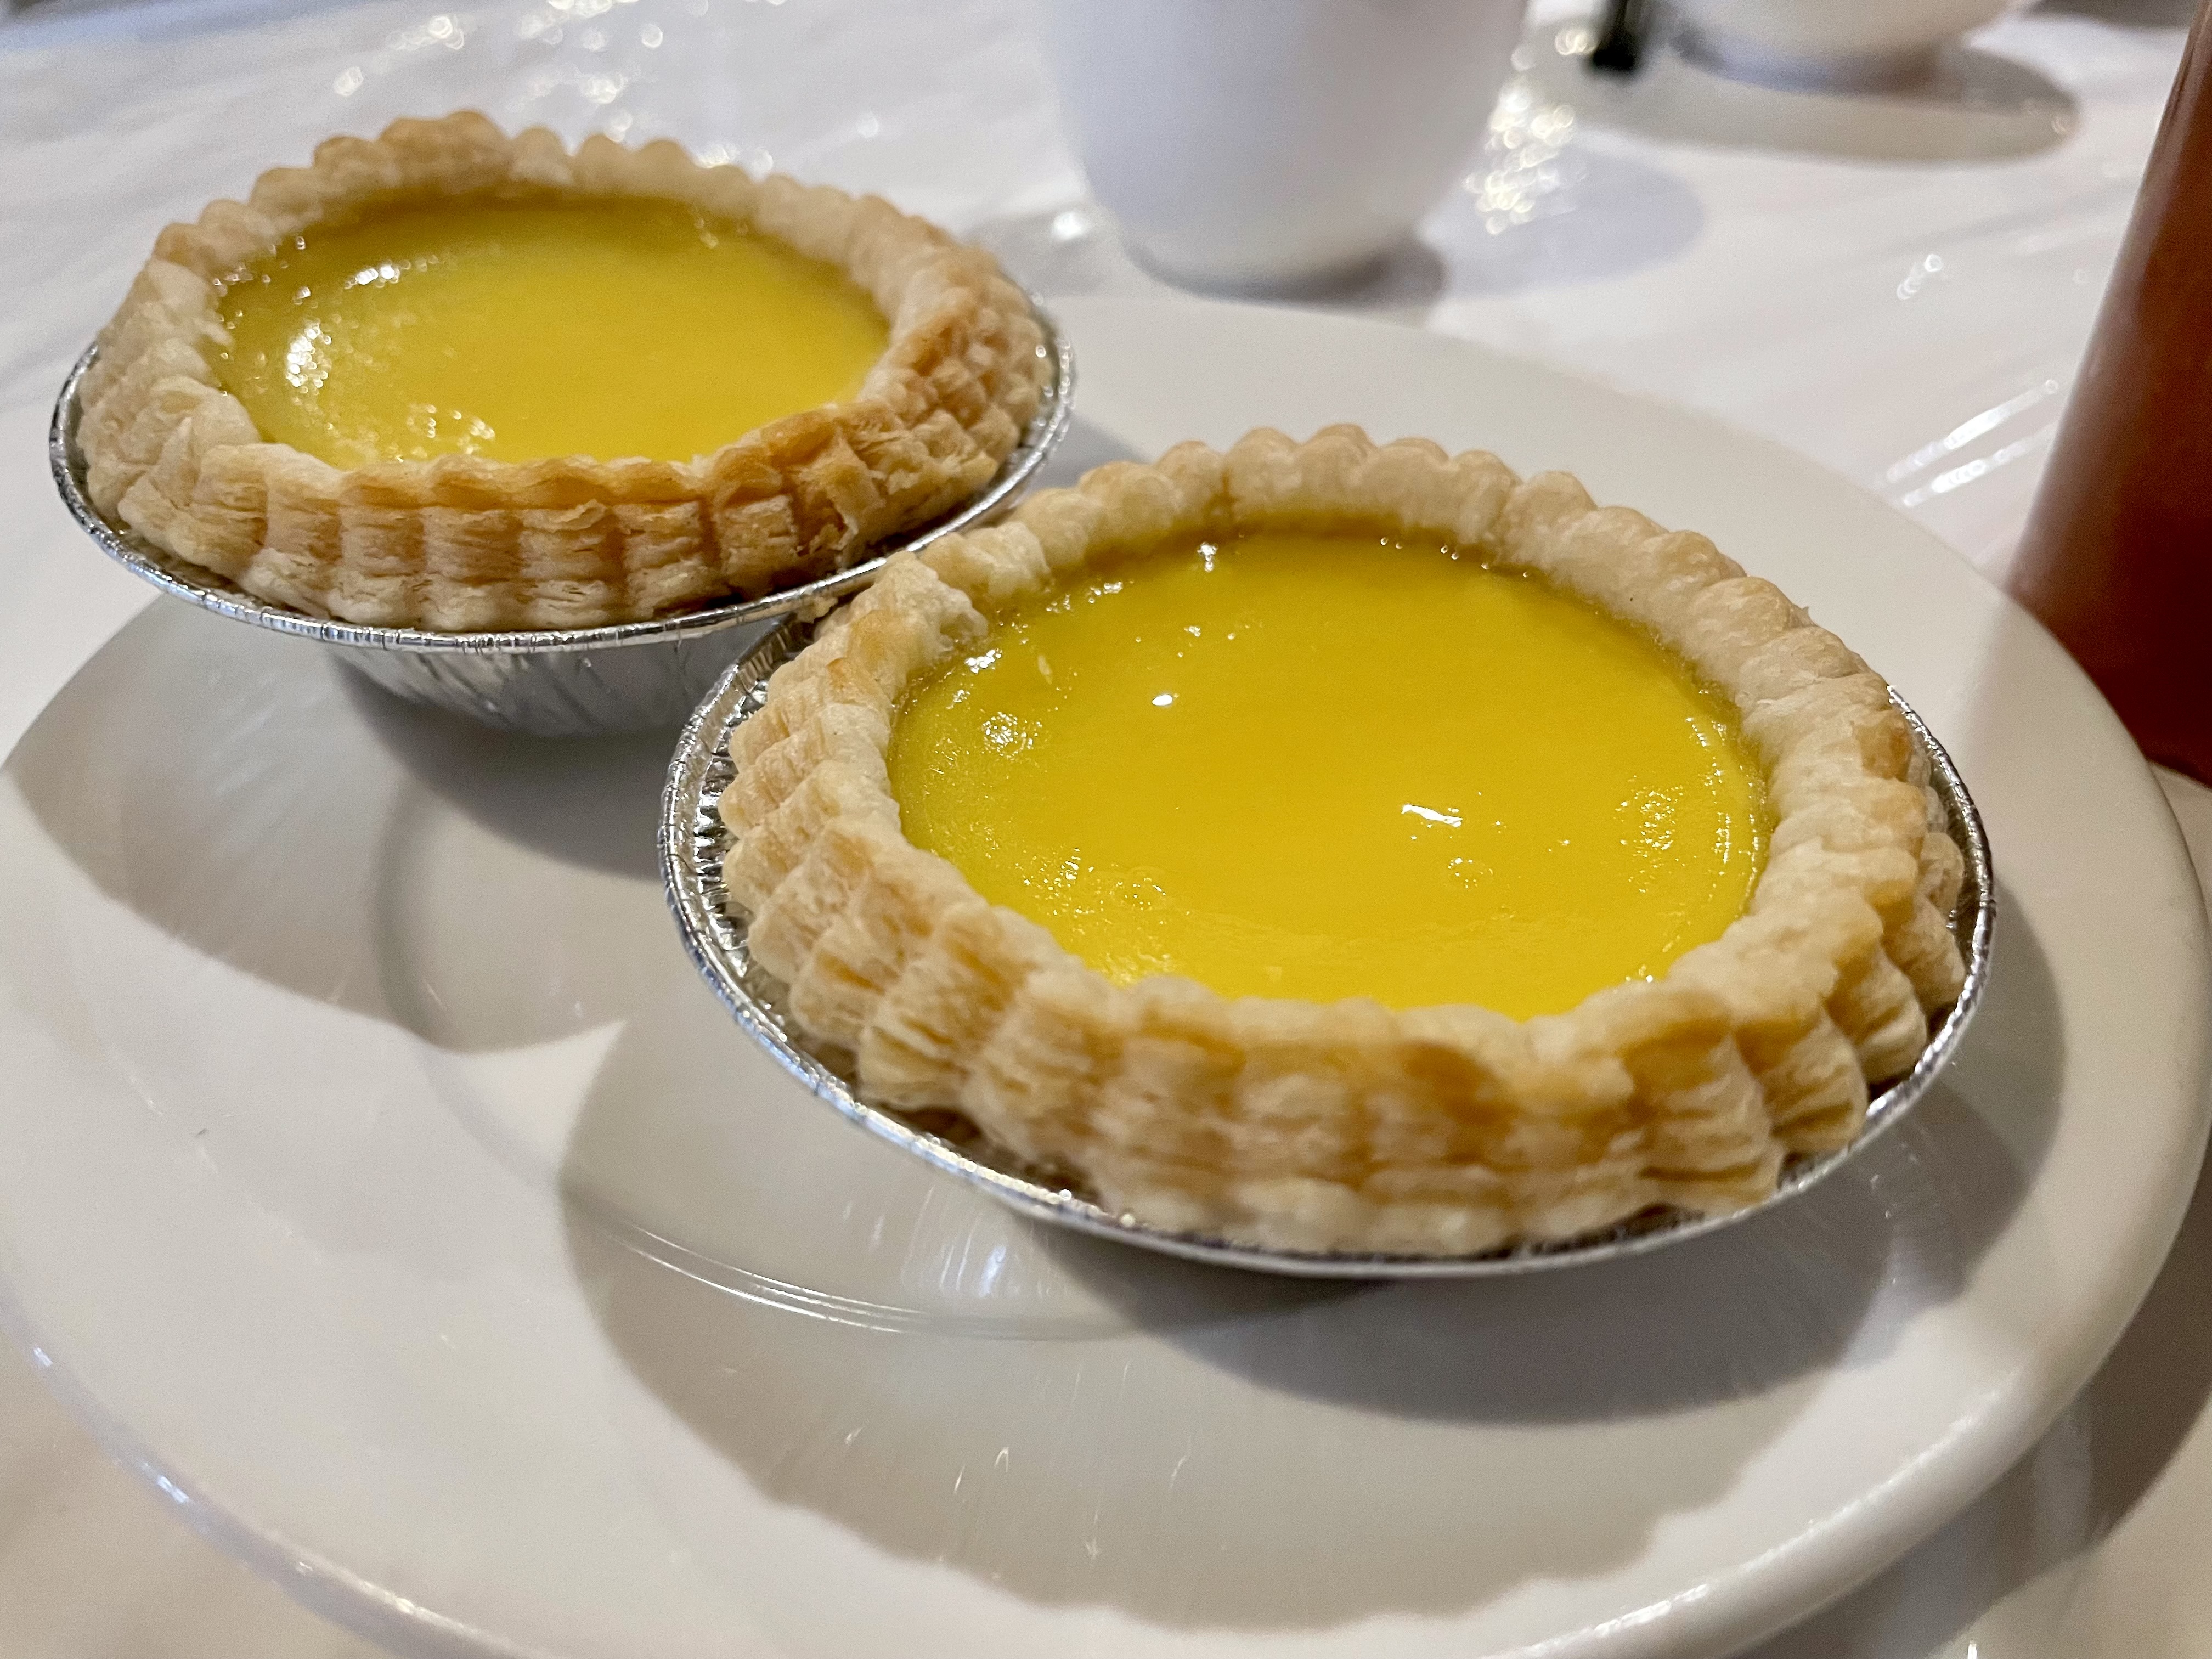 The egg tarts consist of an outer pastry crust filled with egg custard